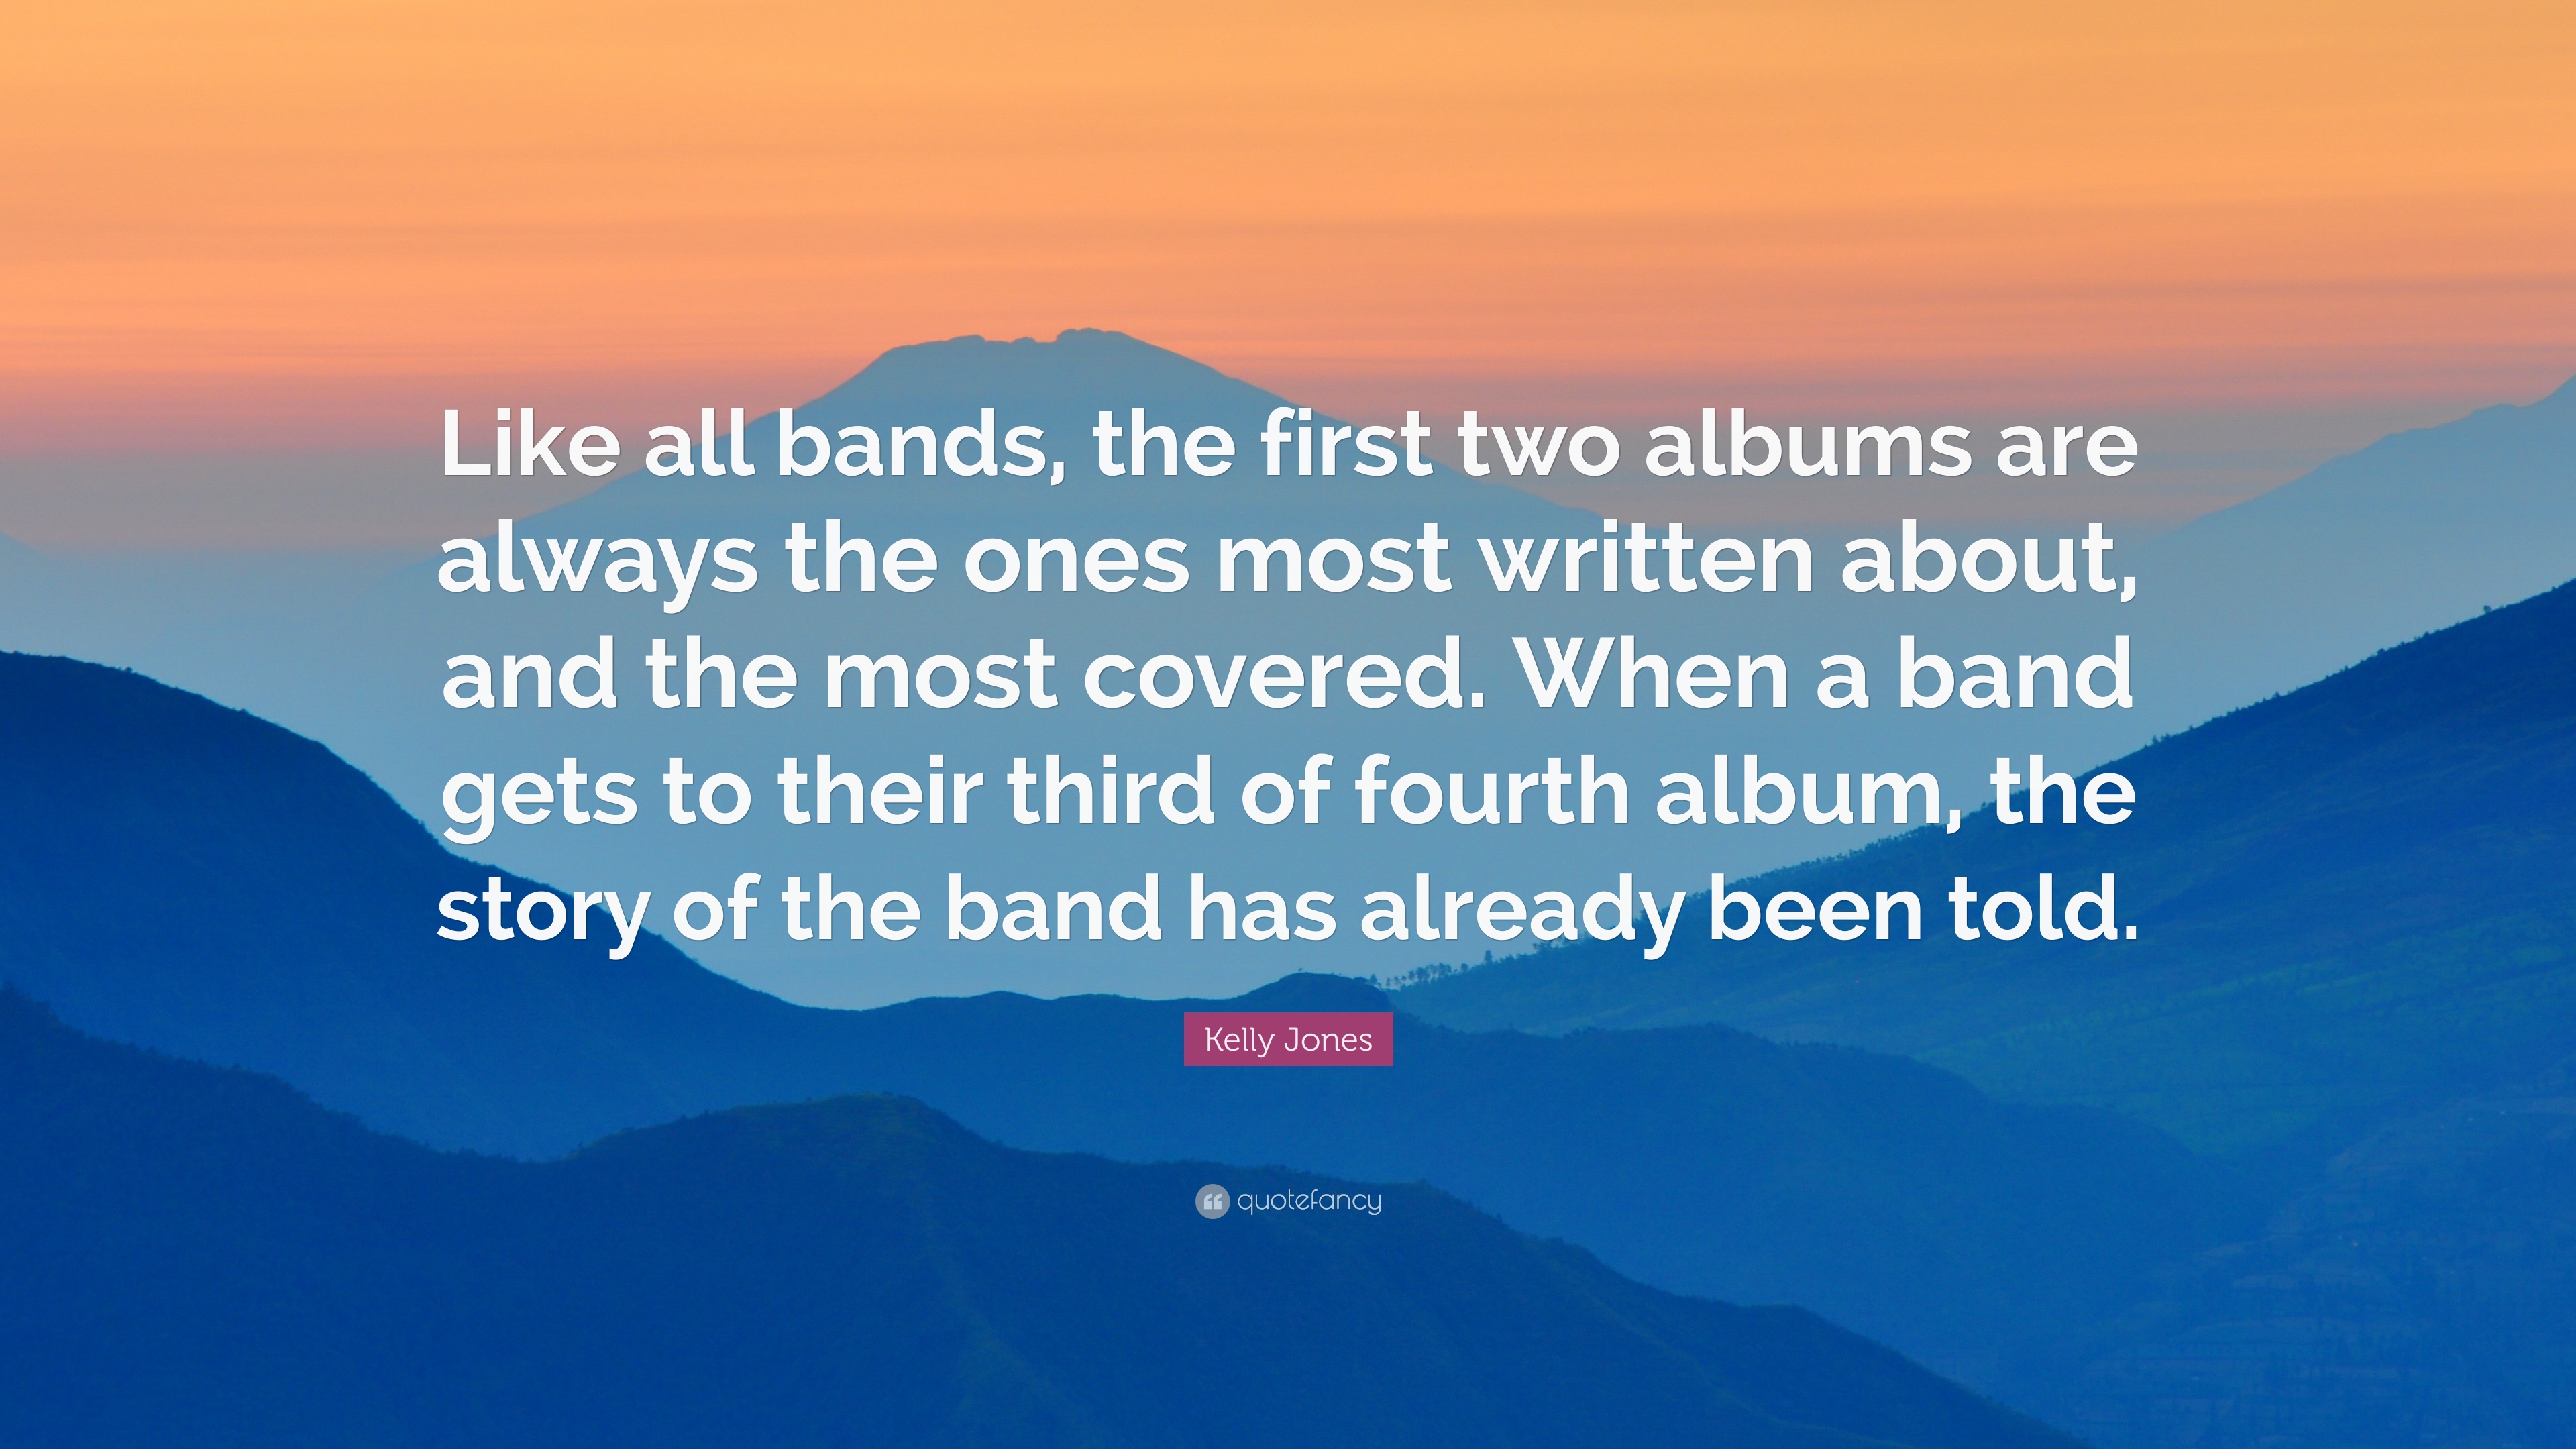 Kelly Jones Quote: “Like all bands, the first two albums are always